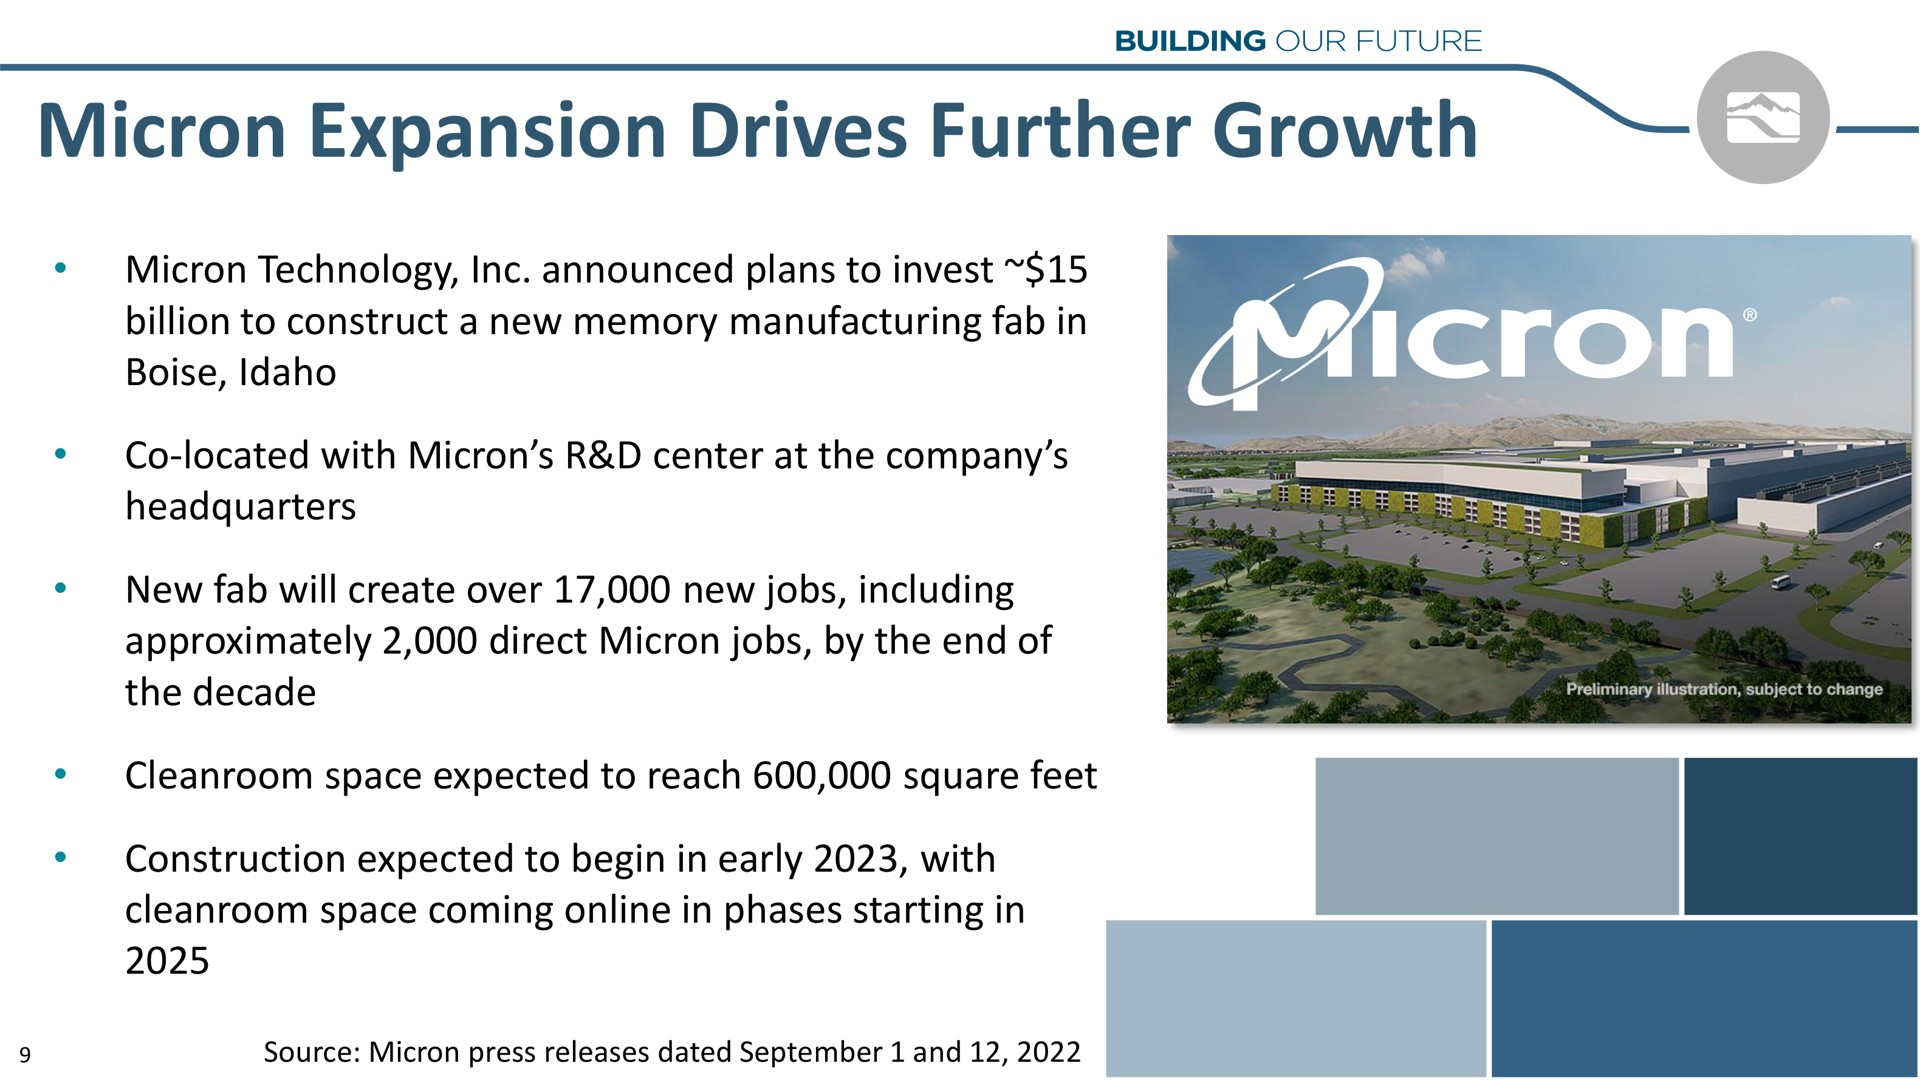 micron expansion drives further growth | Idacorp